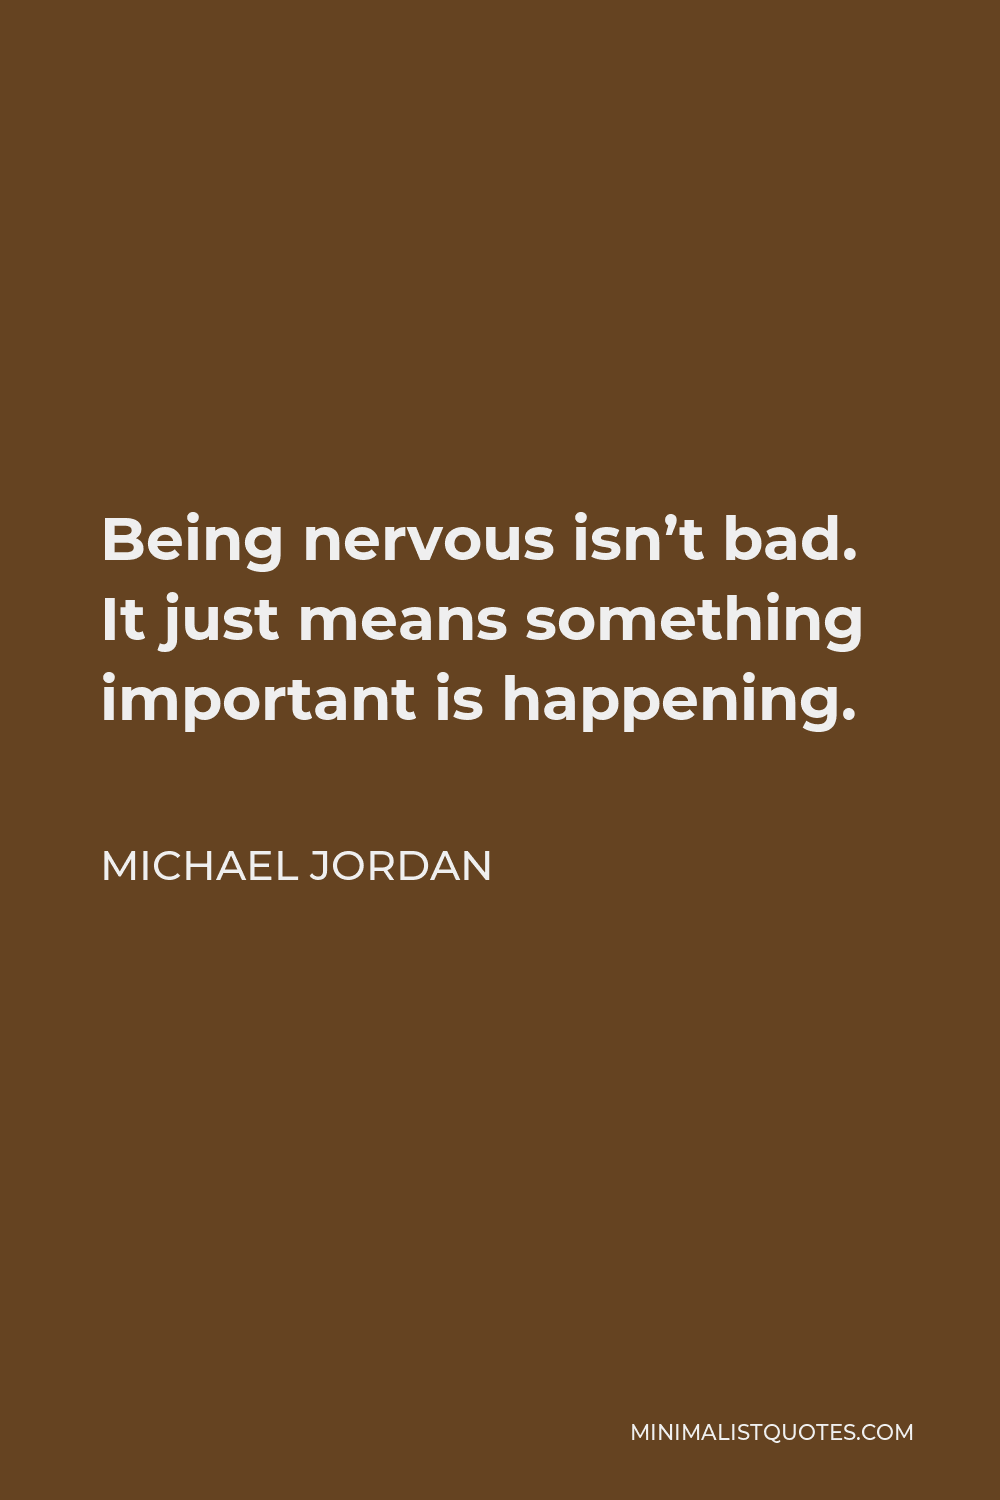 Michael Jordan Quote - Being nervous isn’t bad. It just means something important is happening.